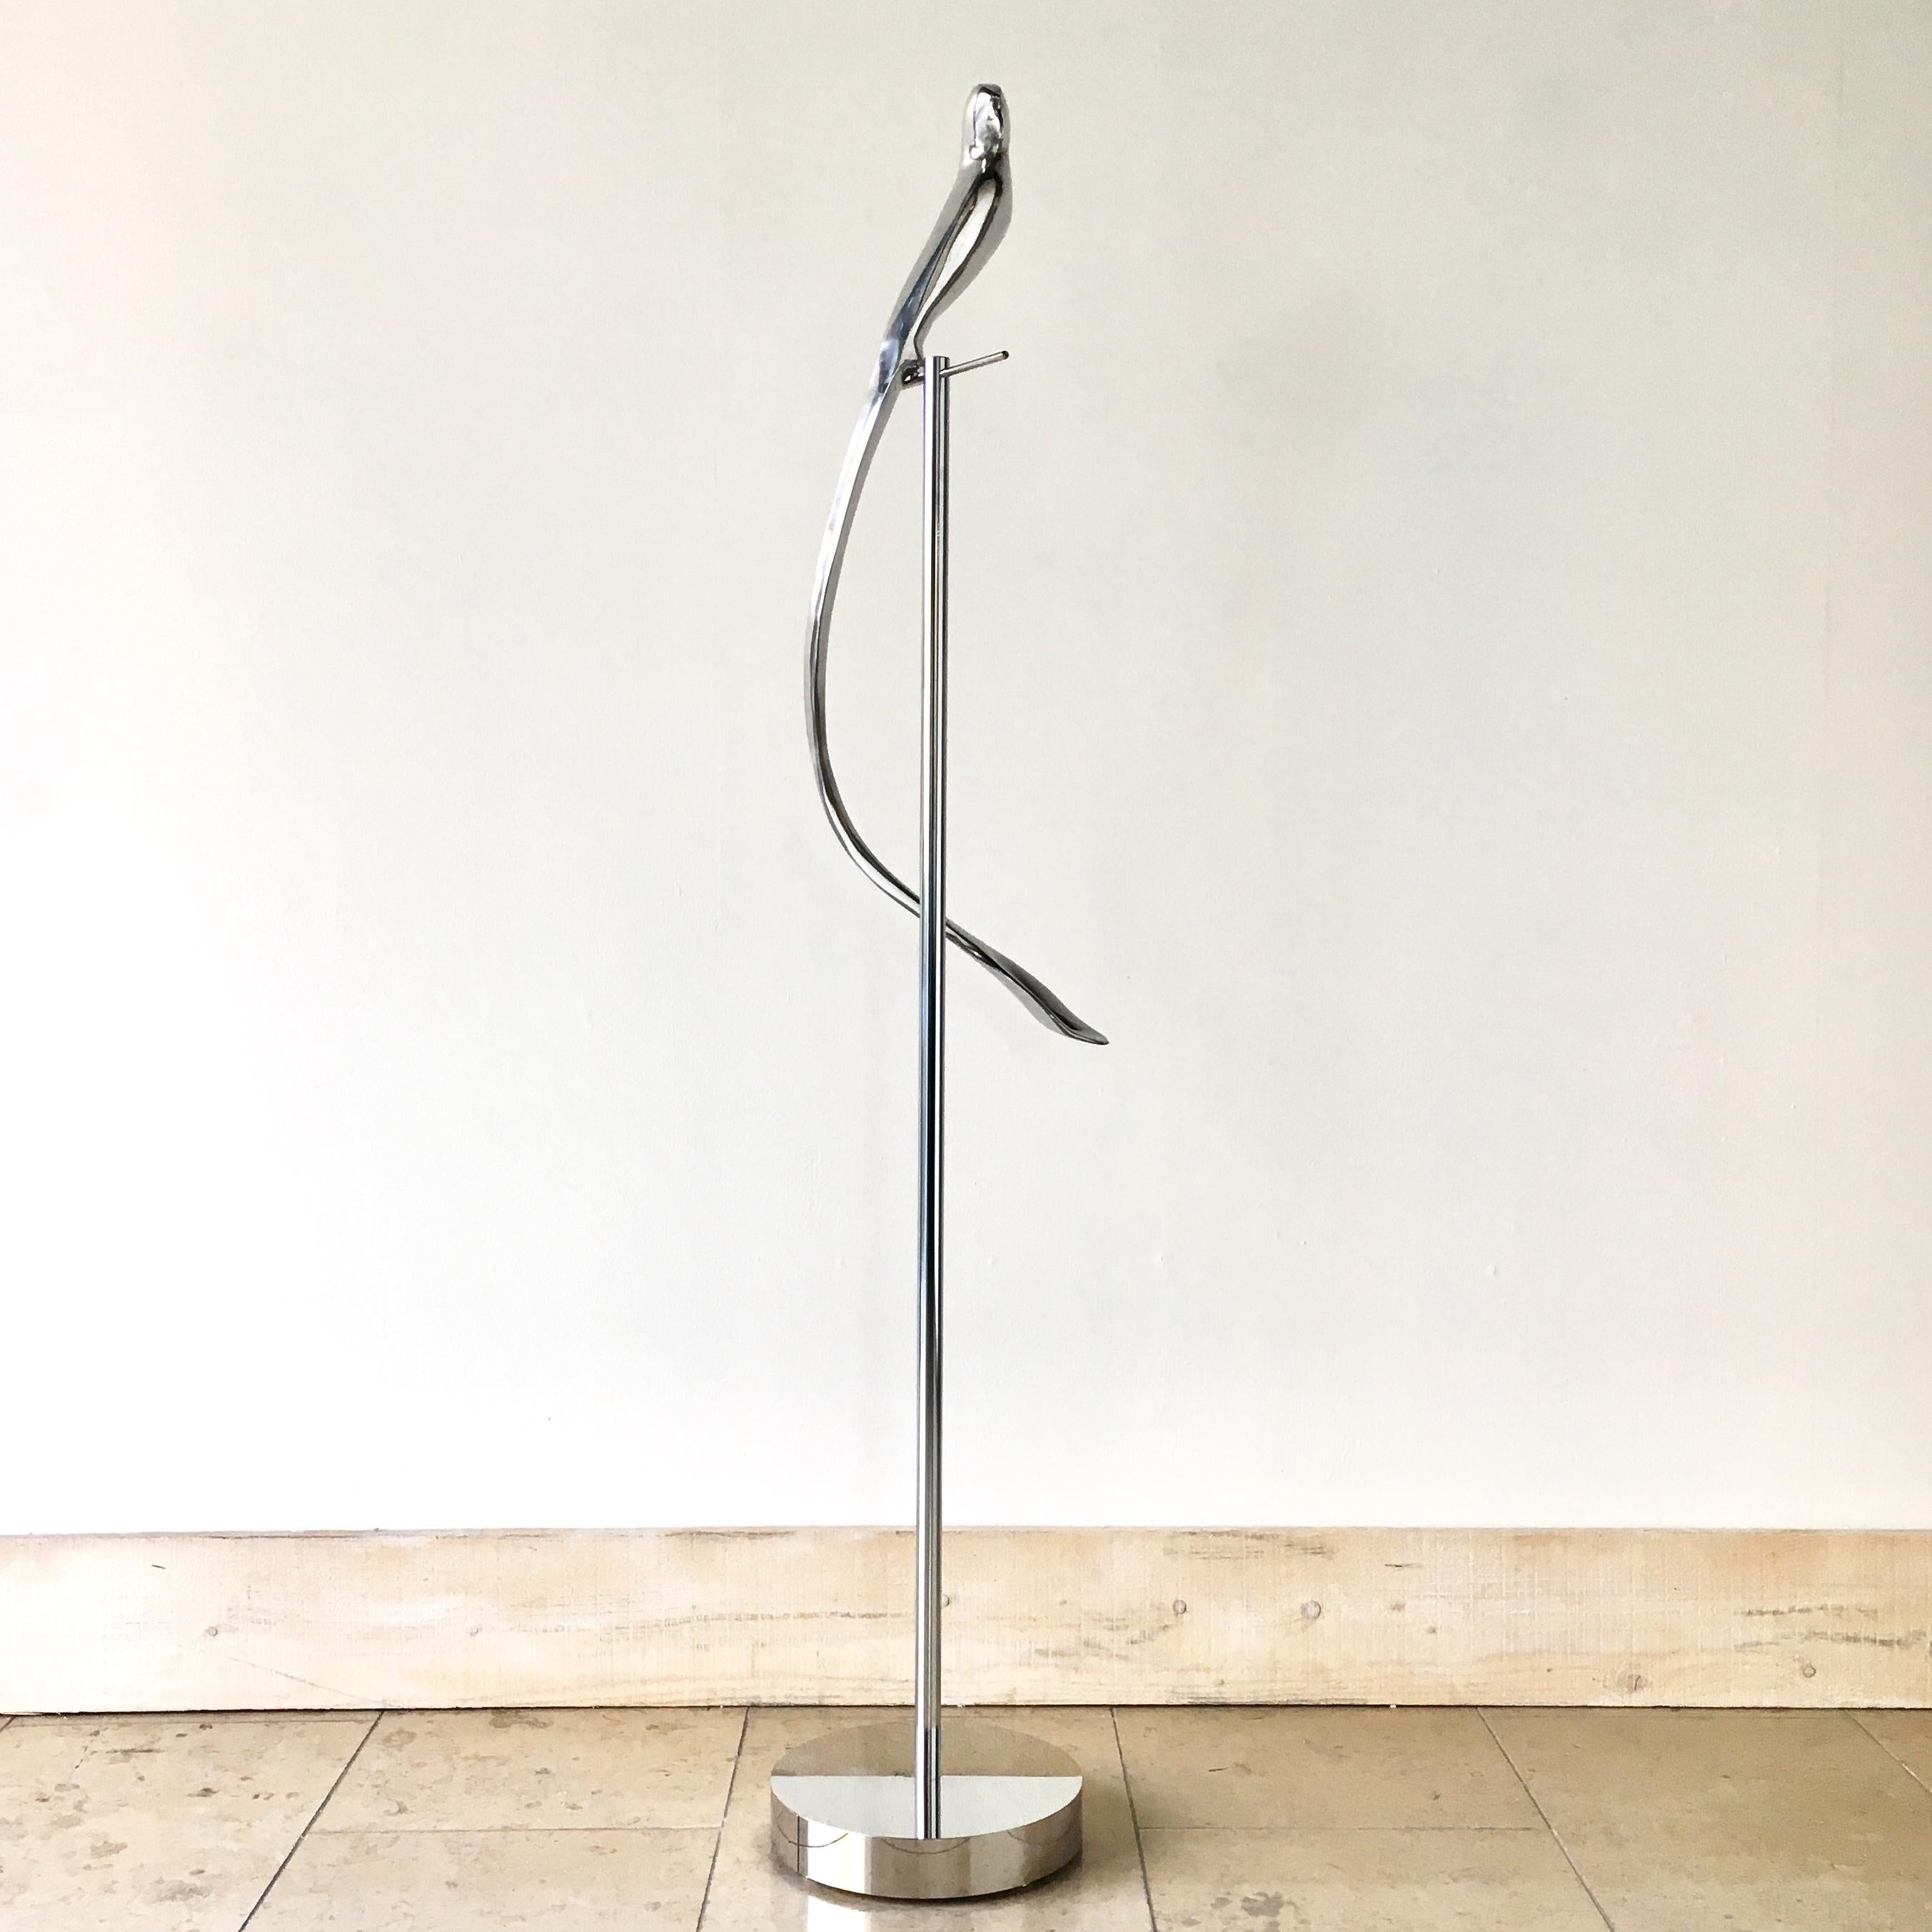 Tall aluminium bird floor sculpture attributed to Curtis Jere, 1970s

Curtis Jeré is the collaboration of two metal sculptors Jerry Fels and Curtis Freiler who founded the company Artisan House in the USA in 1963. These two brother in laws worked